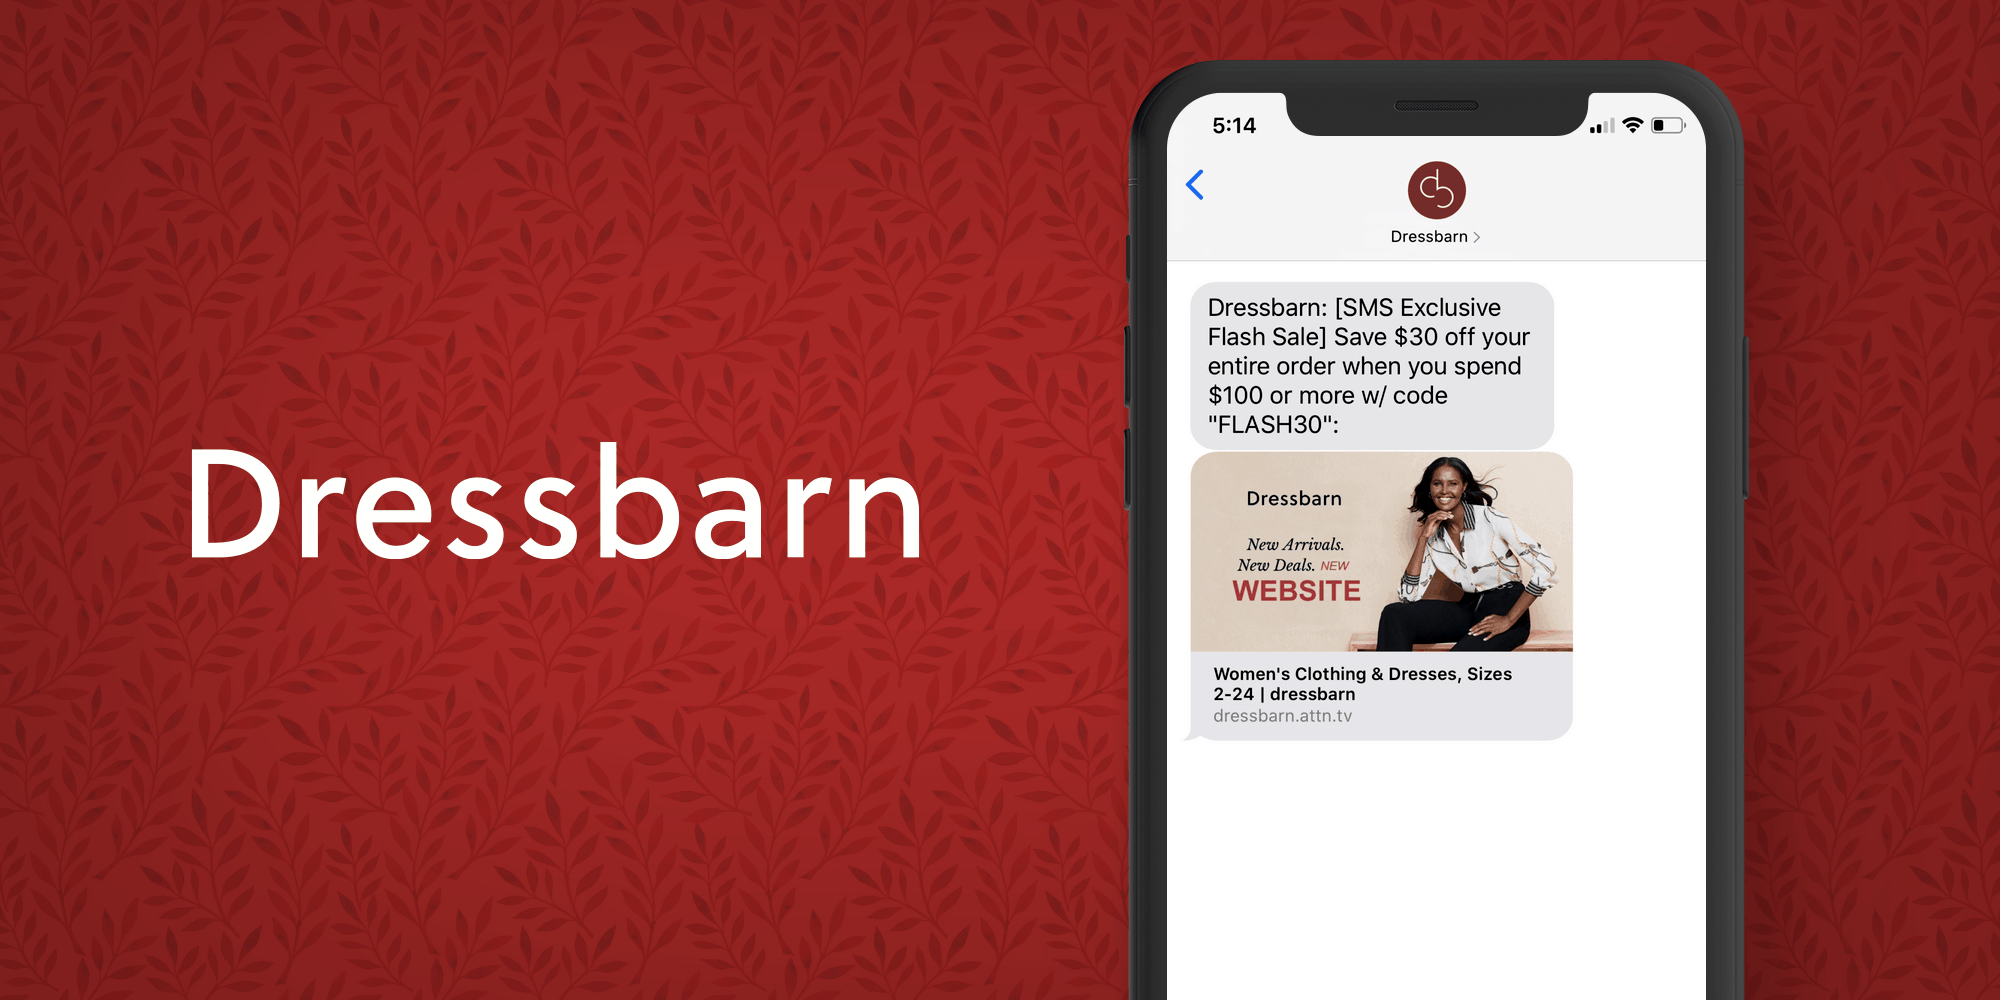 Dress Barn SMS Marketing Example - 50 Examples of Brands Using SMS Marketing